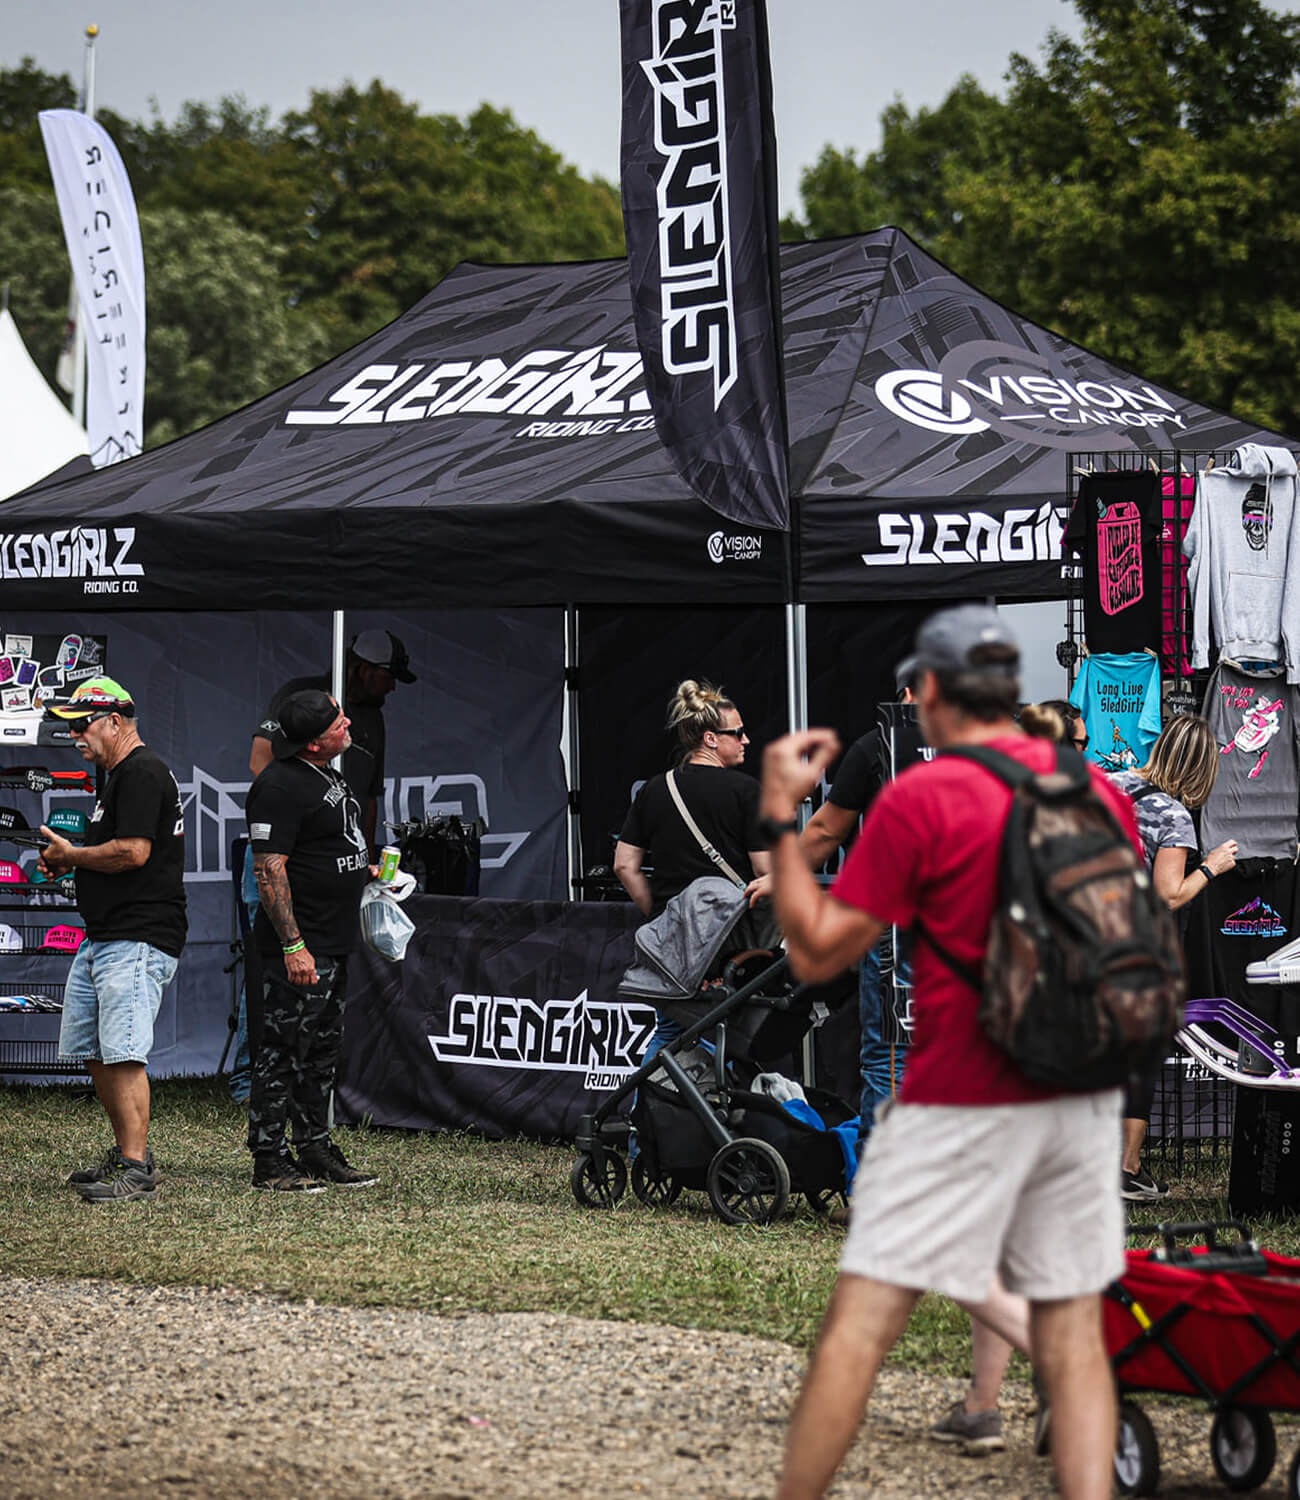 Sled Girlz clothing company booth at Hay Days snowmobiling festival